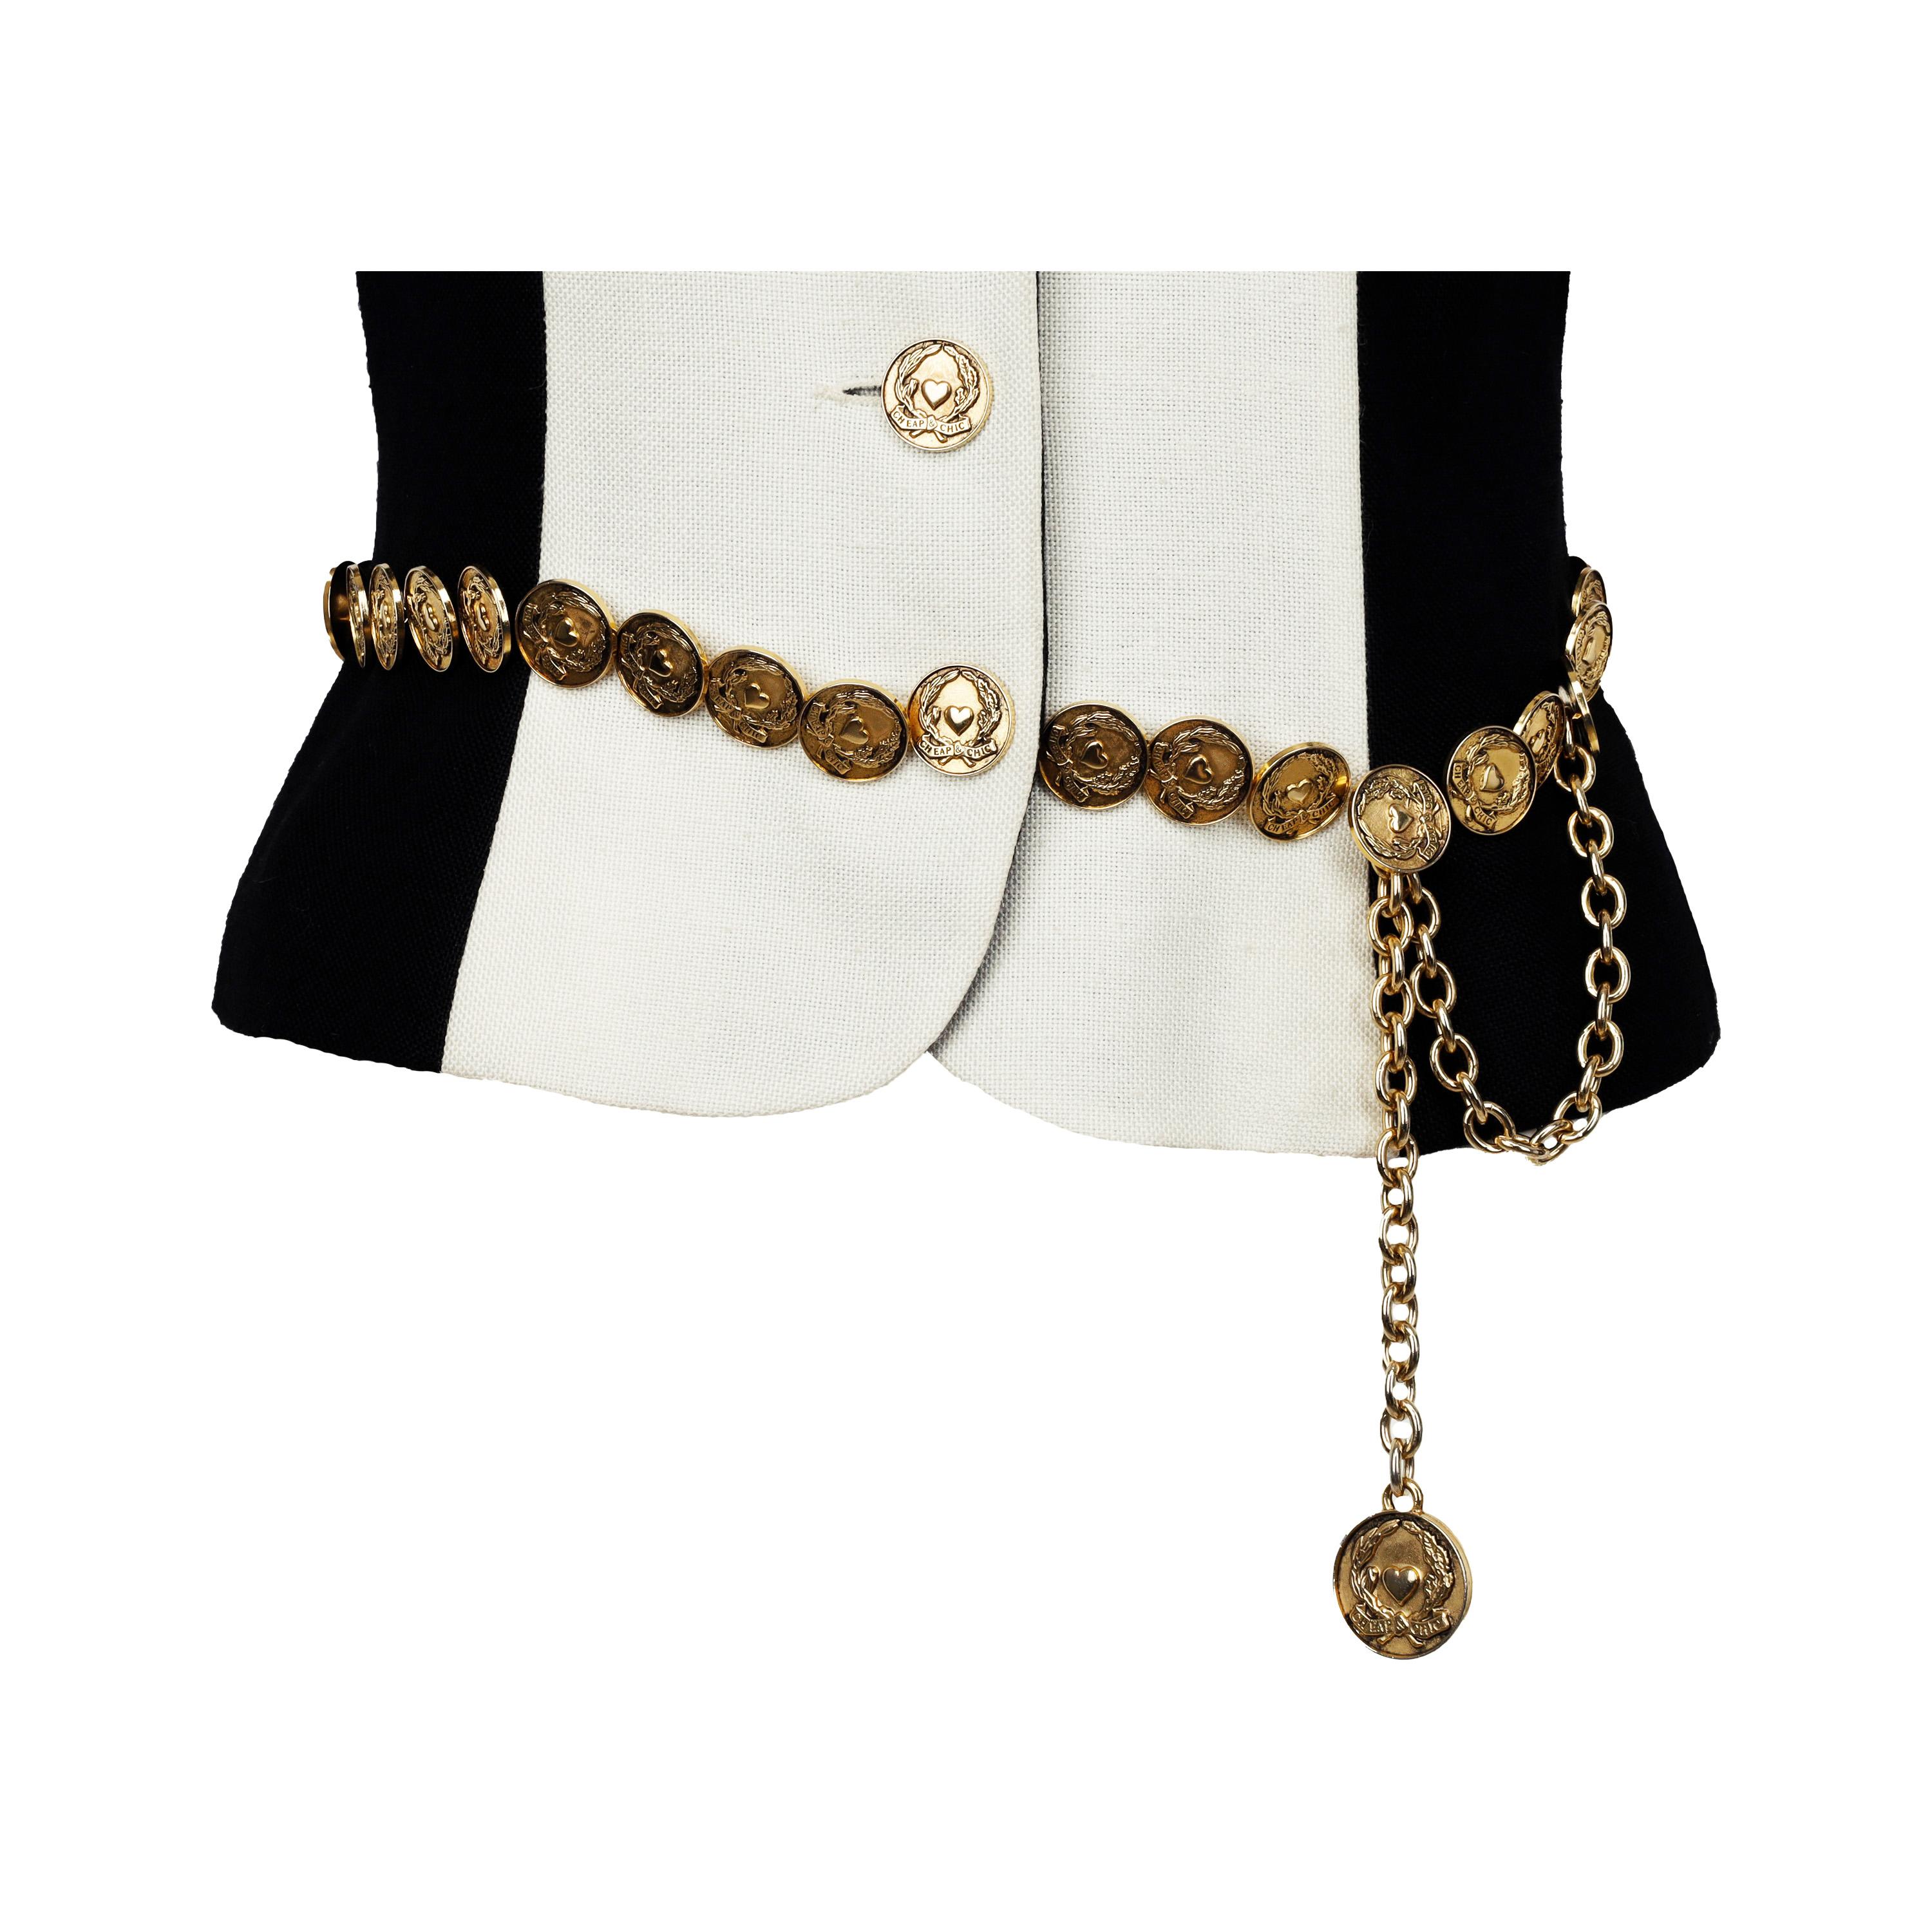 Moschino Cheap and Chic Coin Belt Jacket and Skirt Set For Sale 5